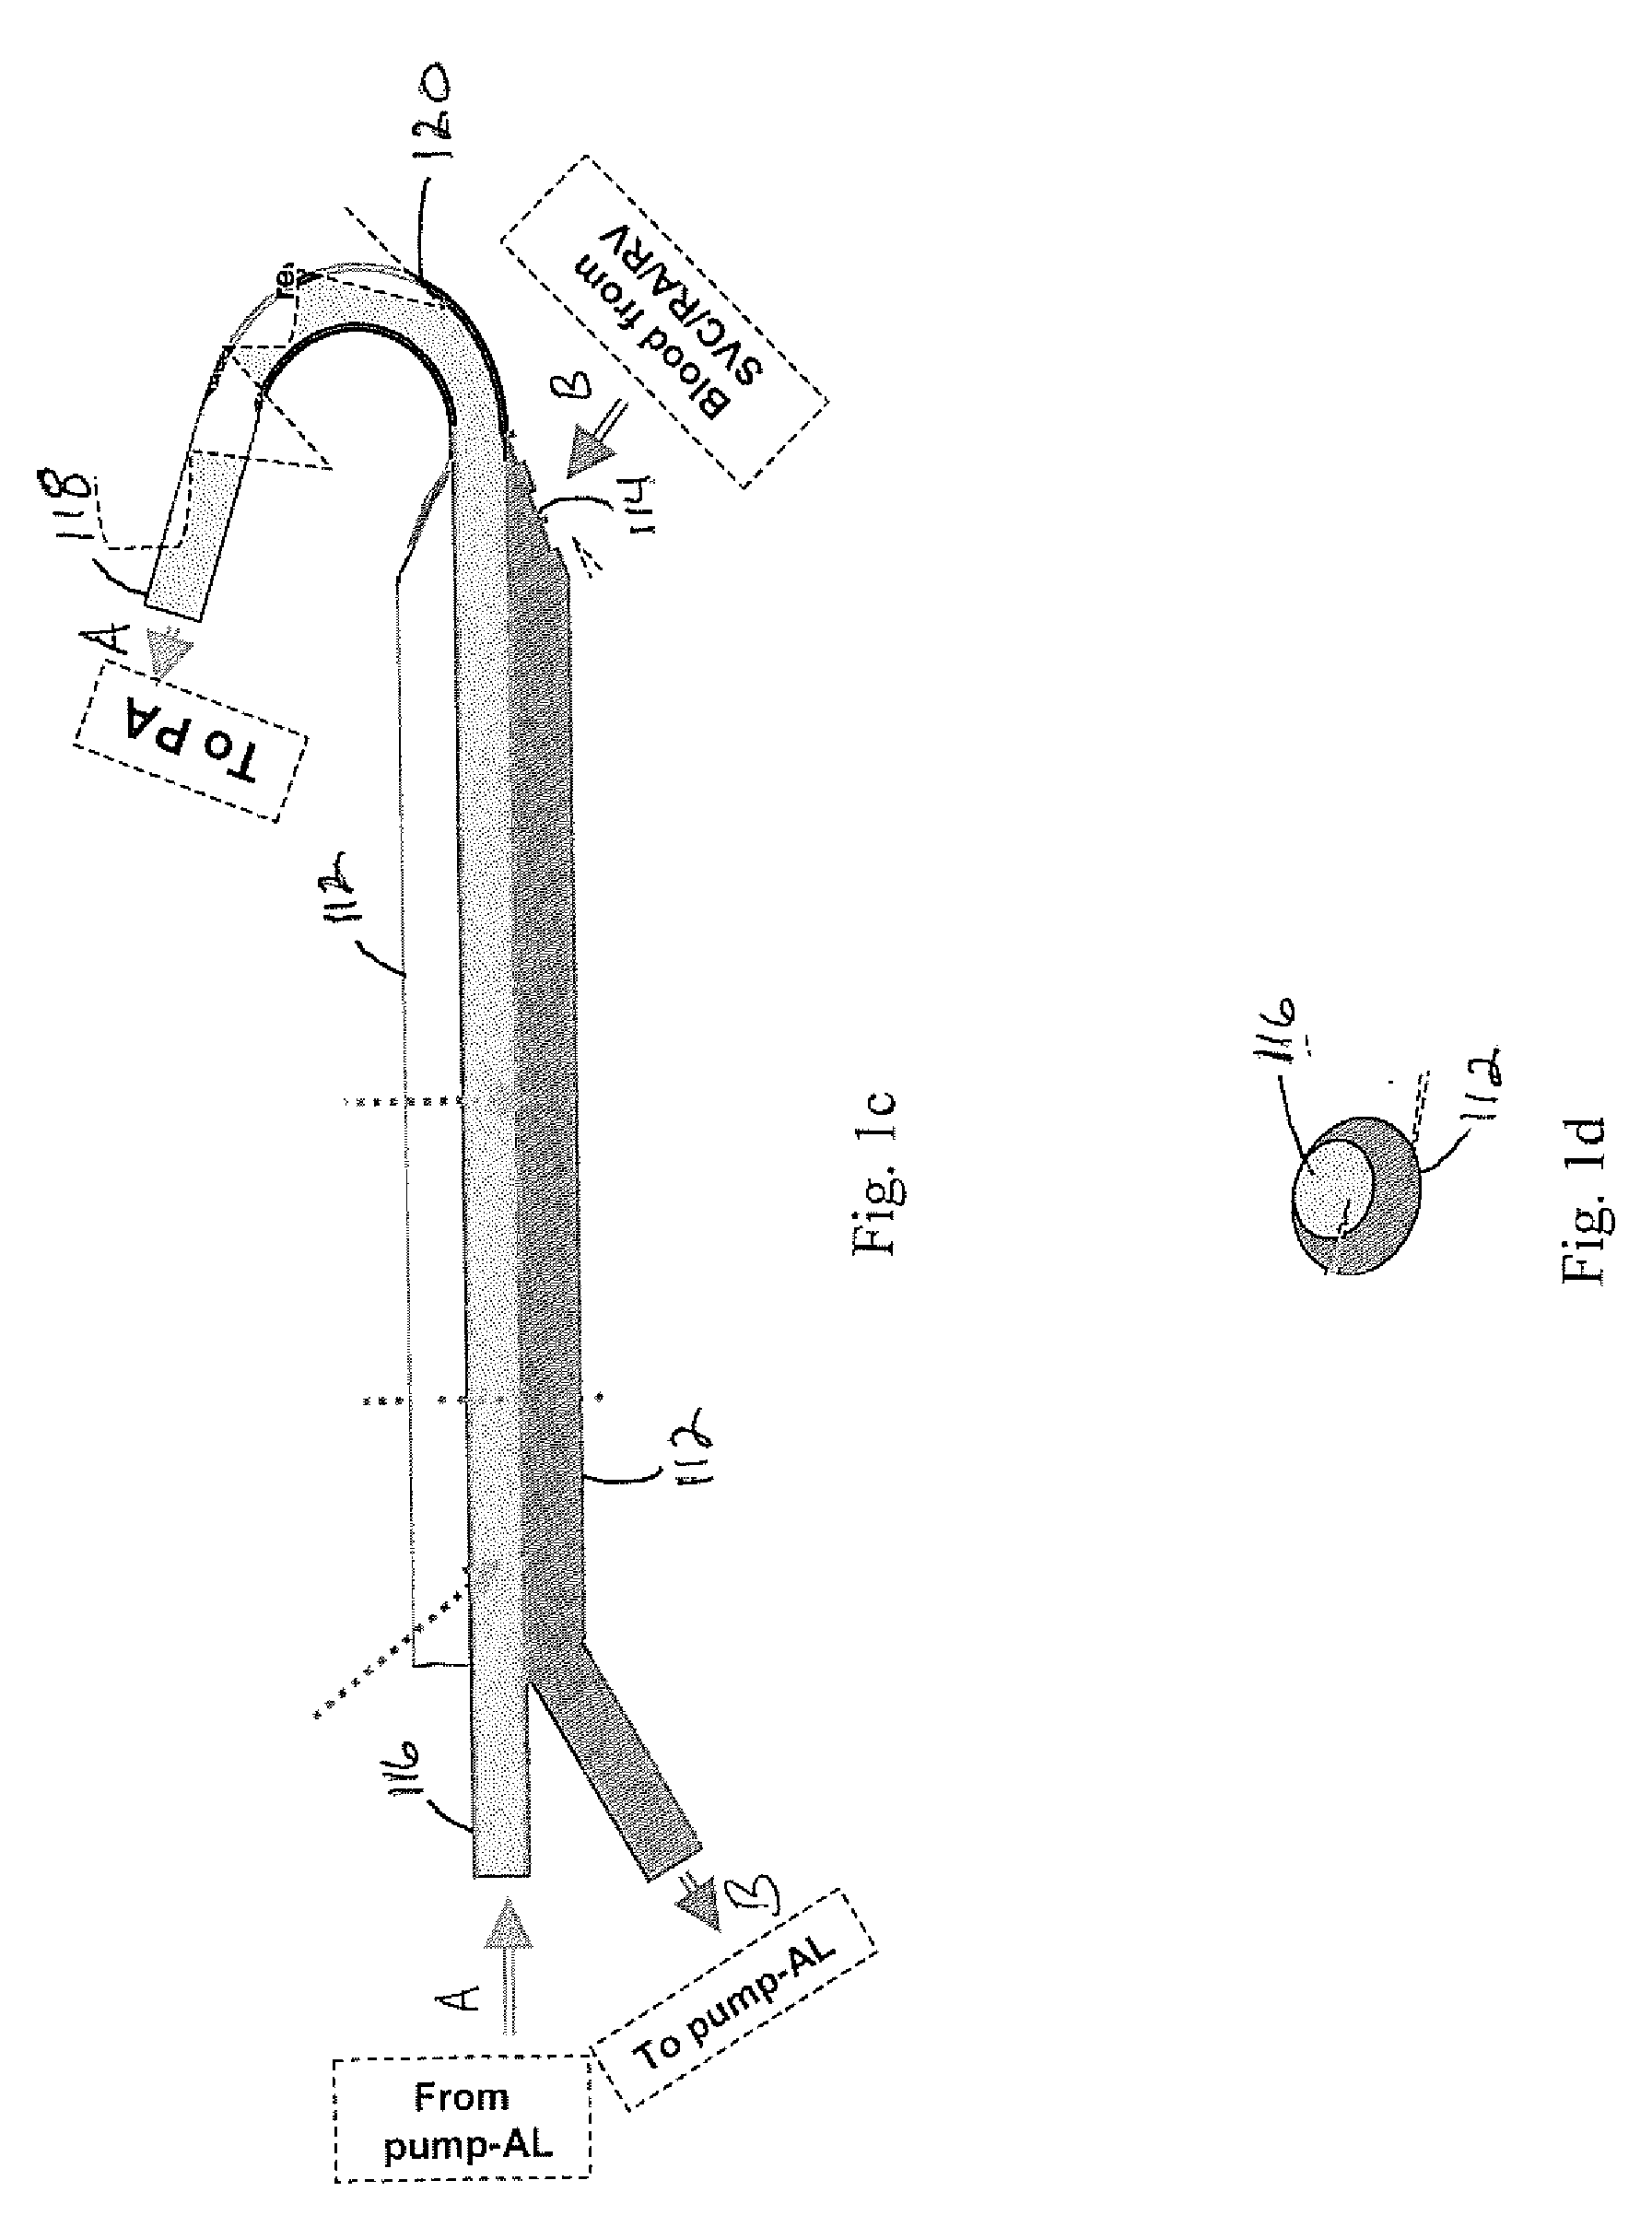 Blood access assembly for artificial lung and right ventricular assist device